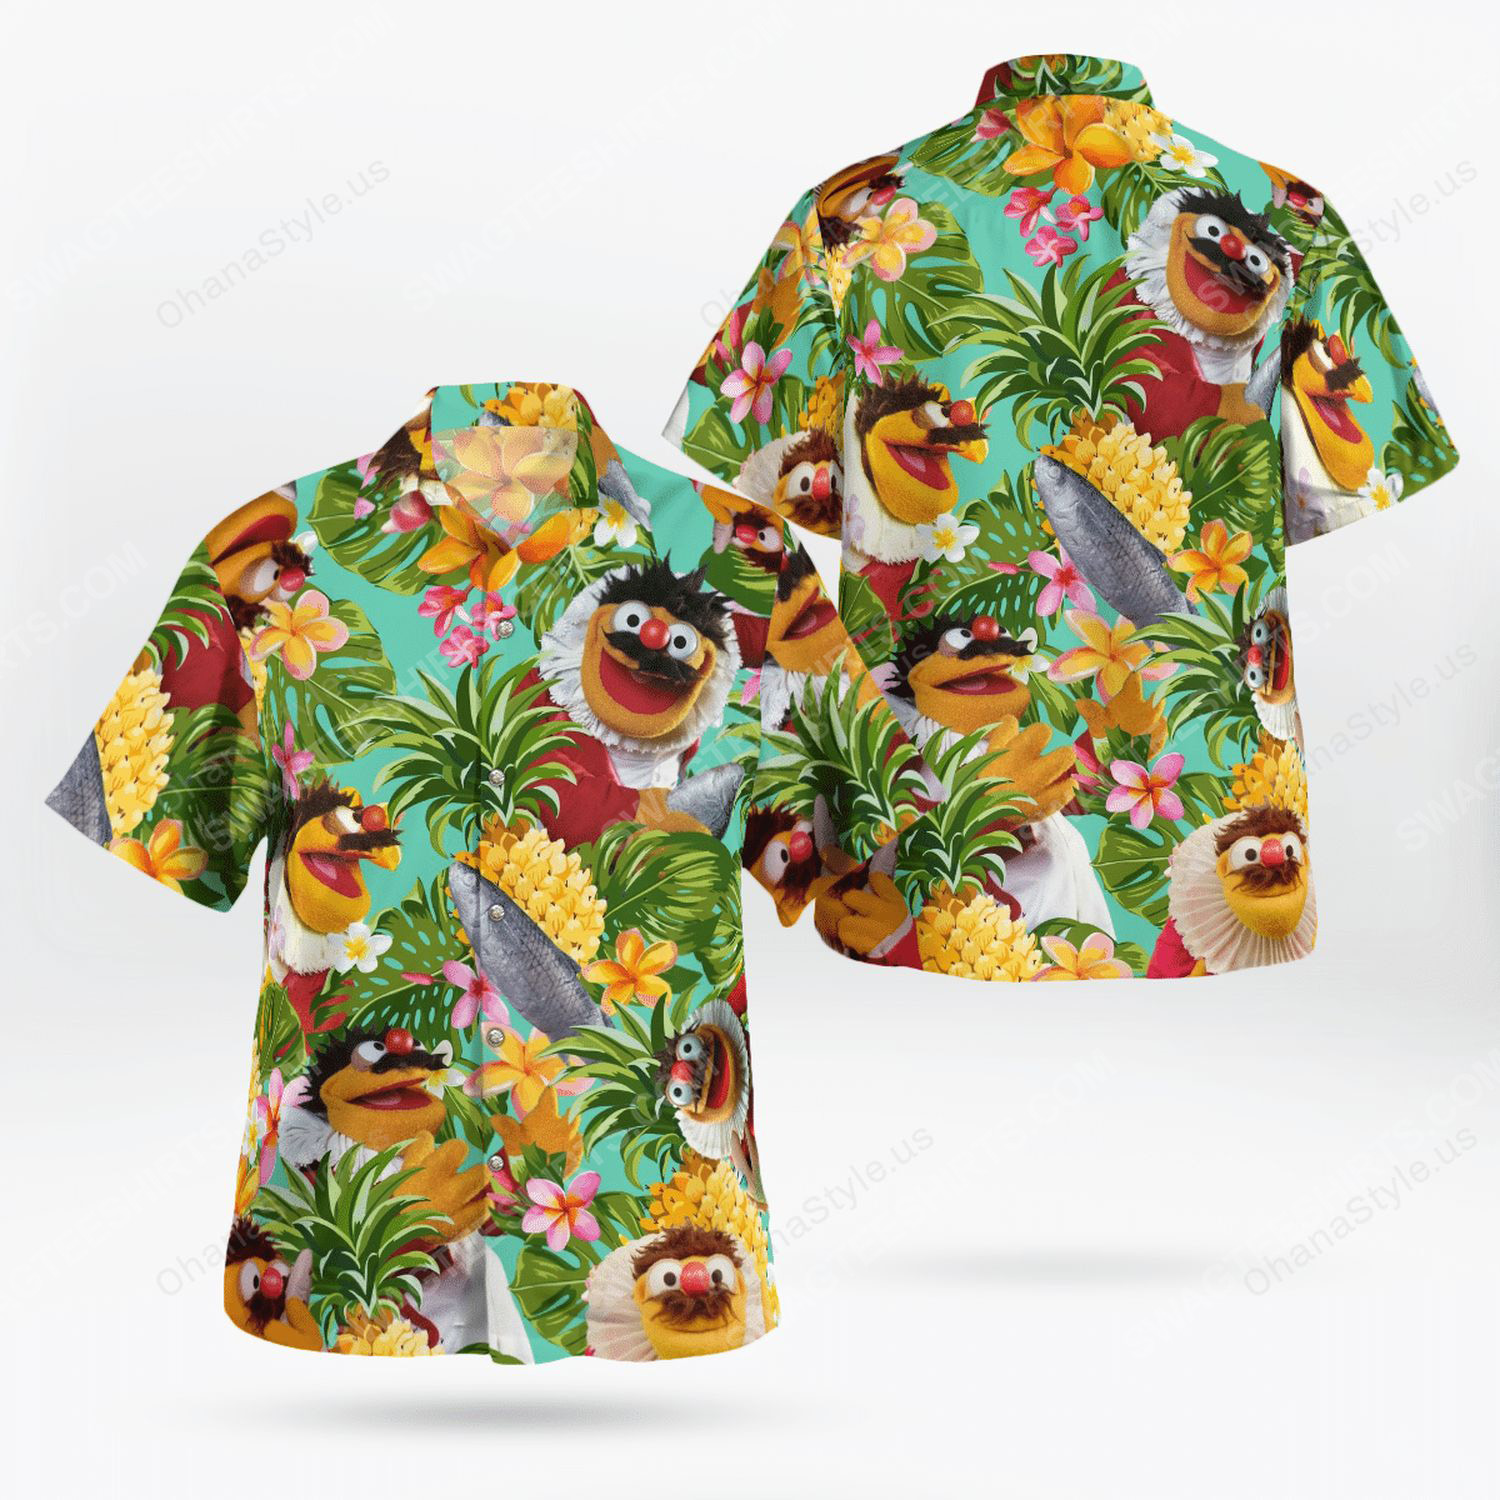 [special edition] The muppet show lew zealand hawaiian shirt – maria